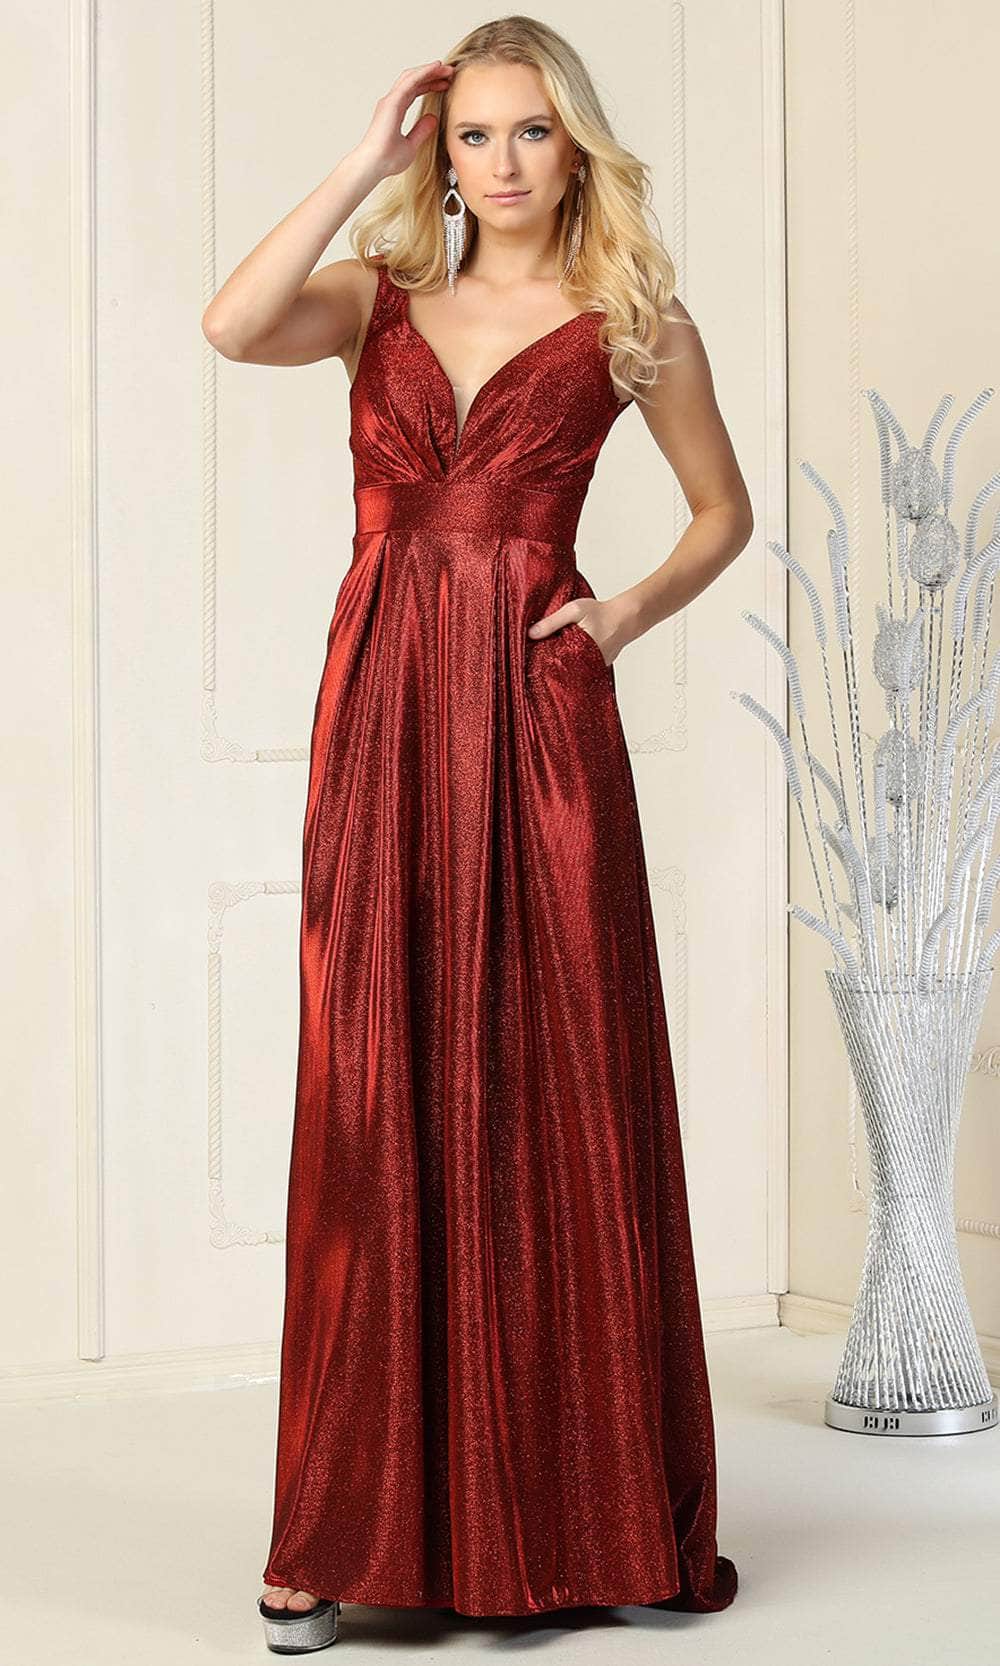 May Queen MQ1875 - Glitter V-Neck Formal Gown Special Occasion Dress 4 / Burgundy